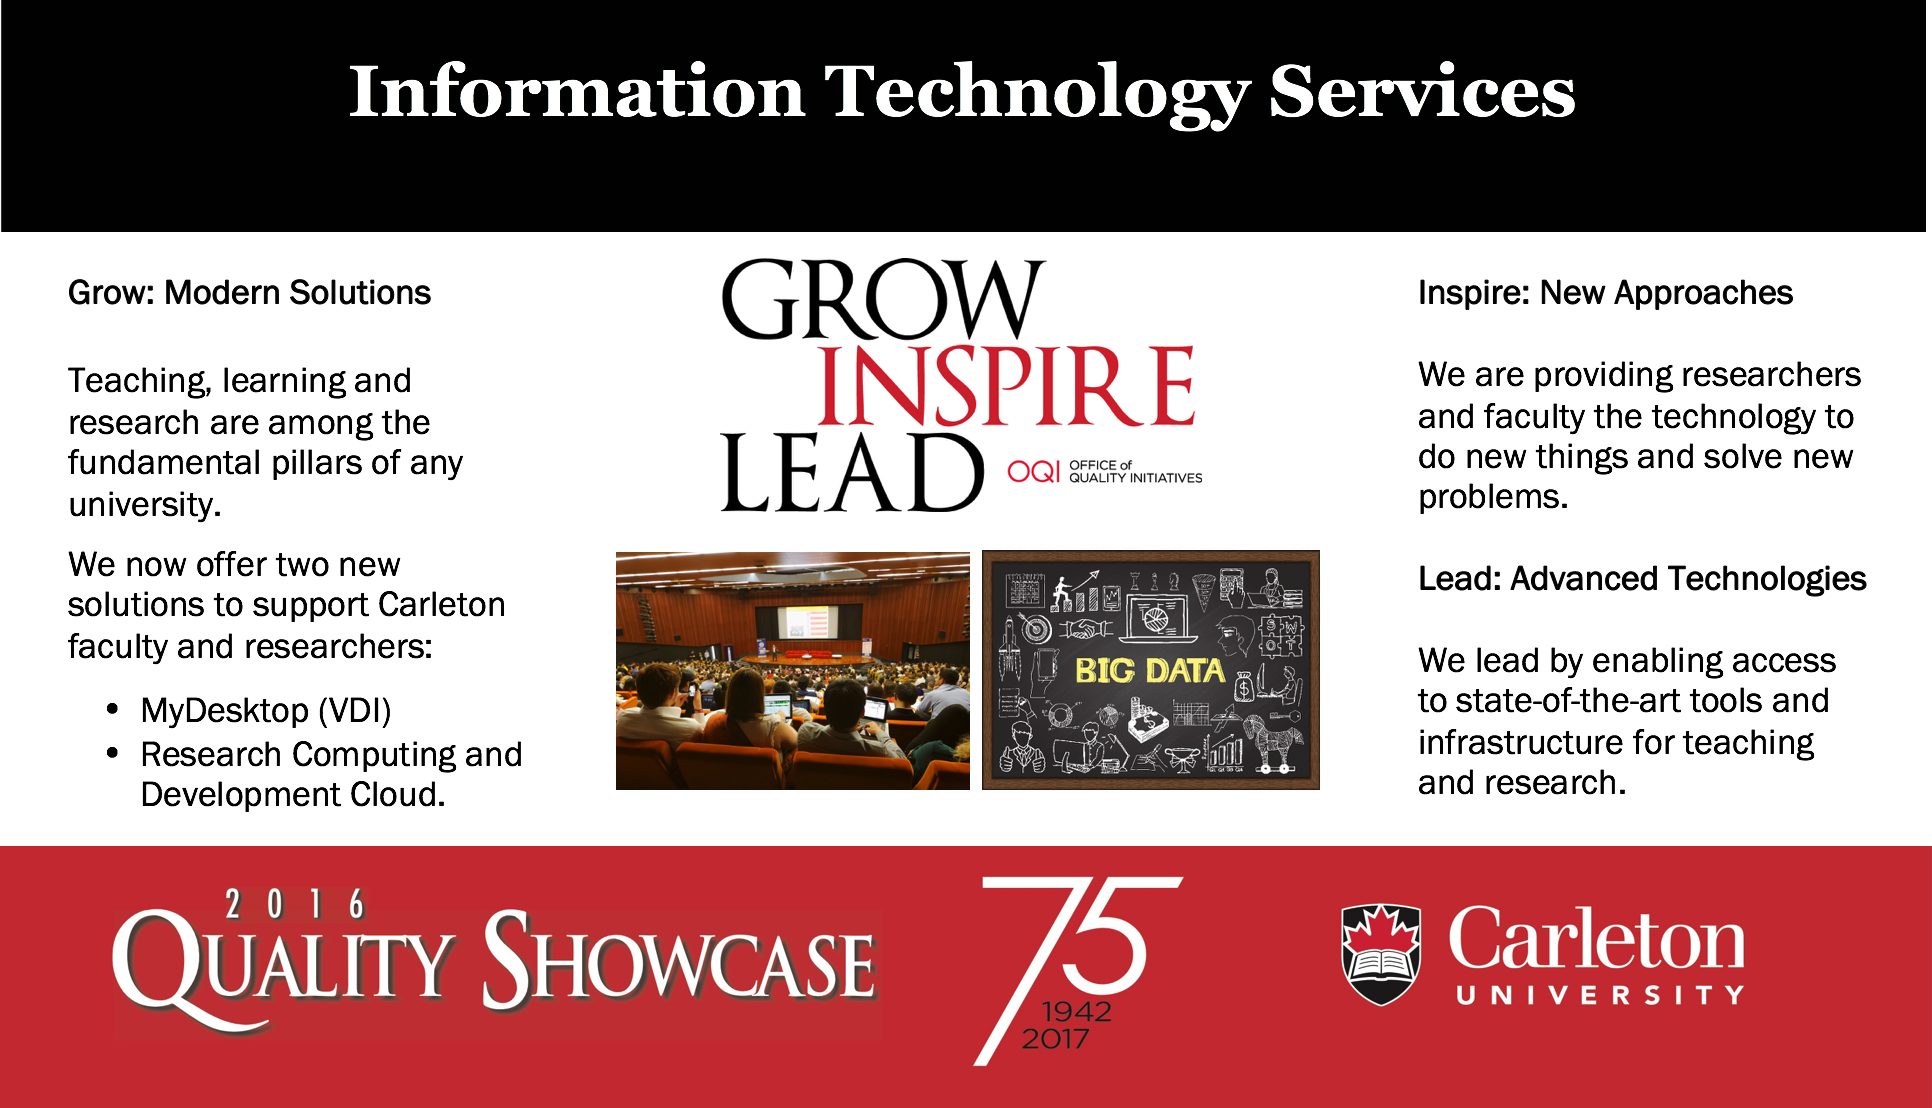  Grow: Modern Solutions Teaching, learning and research are among the fundamental pillars of any university. We now offer two new solutions to support Carleton faculty and researchers: • MyDesktop (VDI) • Research Computing and Development Cloud.